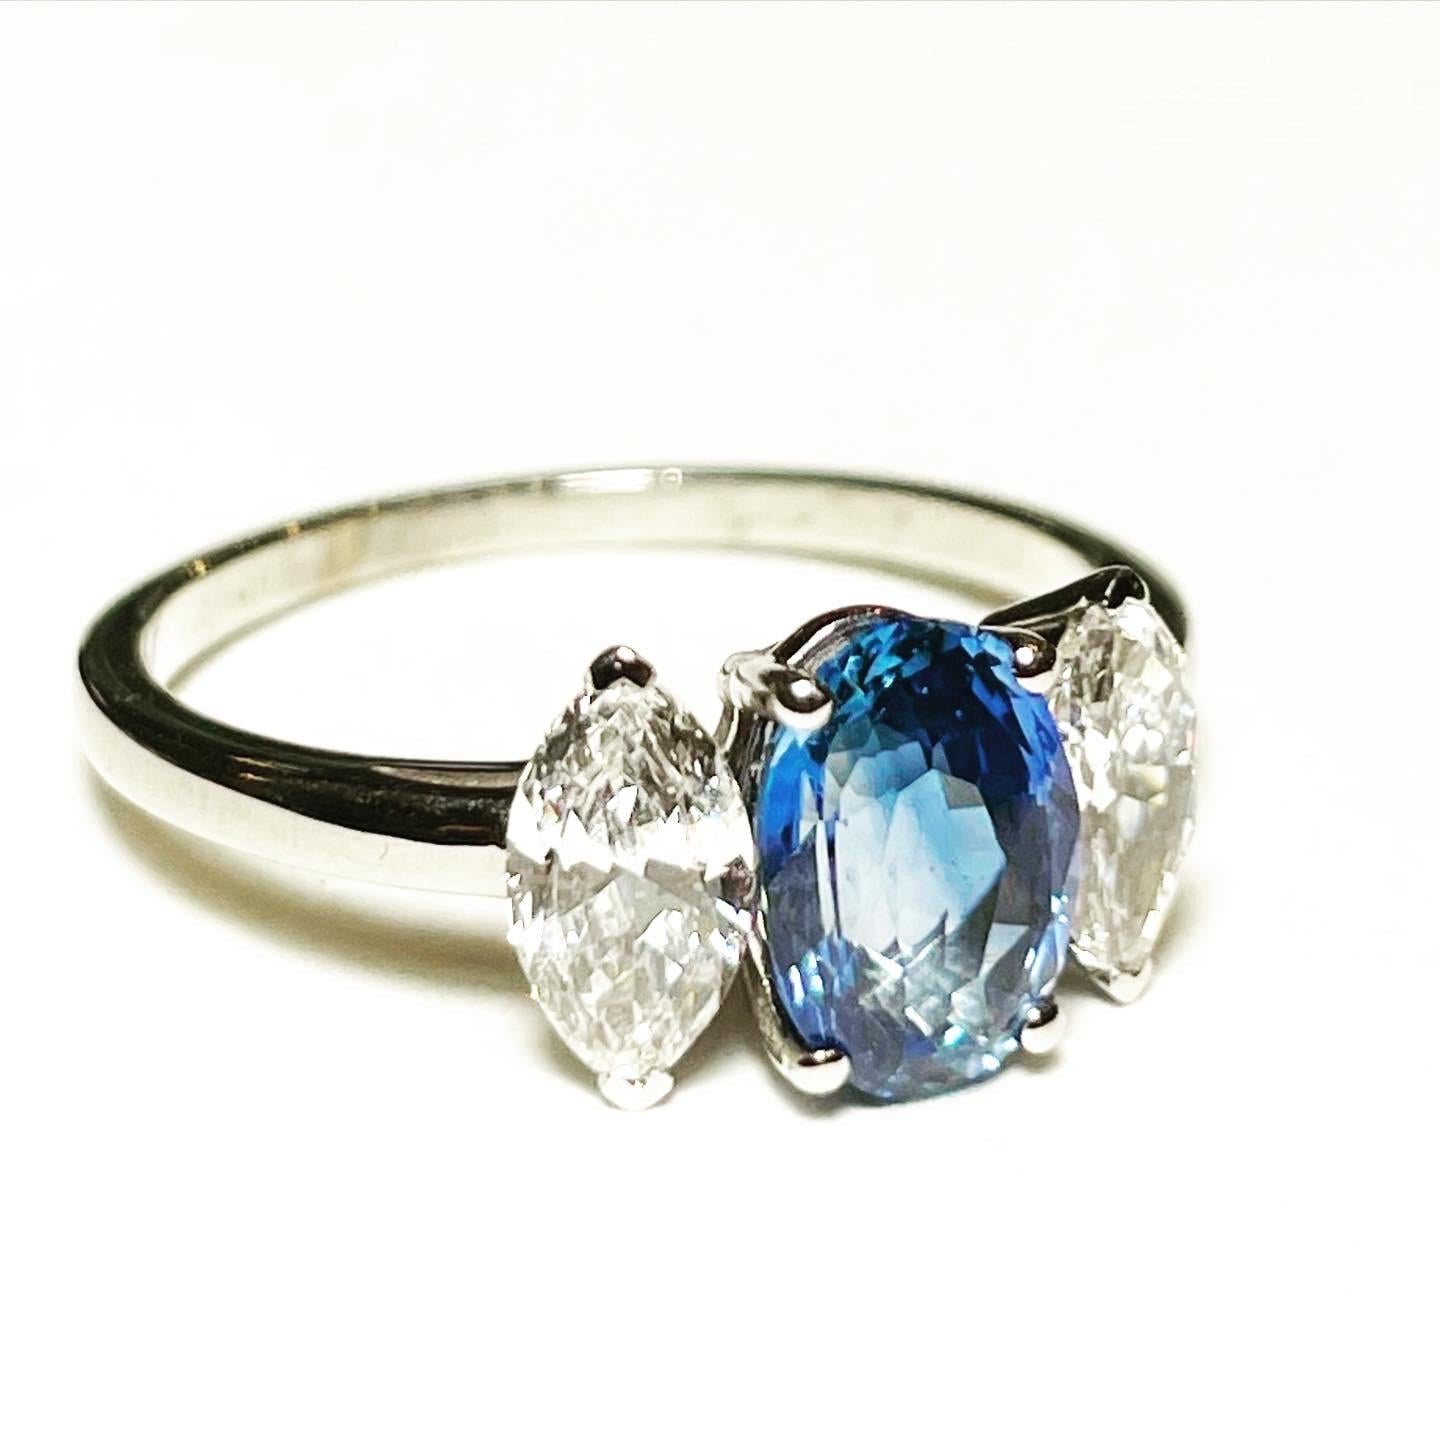 This classic three-stone engagement ring is crafted in 18K white gold.
At the centre of this three stone ring there is a gorgeous oval blue sapphire and sat either side is a bright sparkling navette diamond. The oval cut sapphire weights 1.65 carat